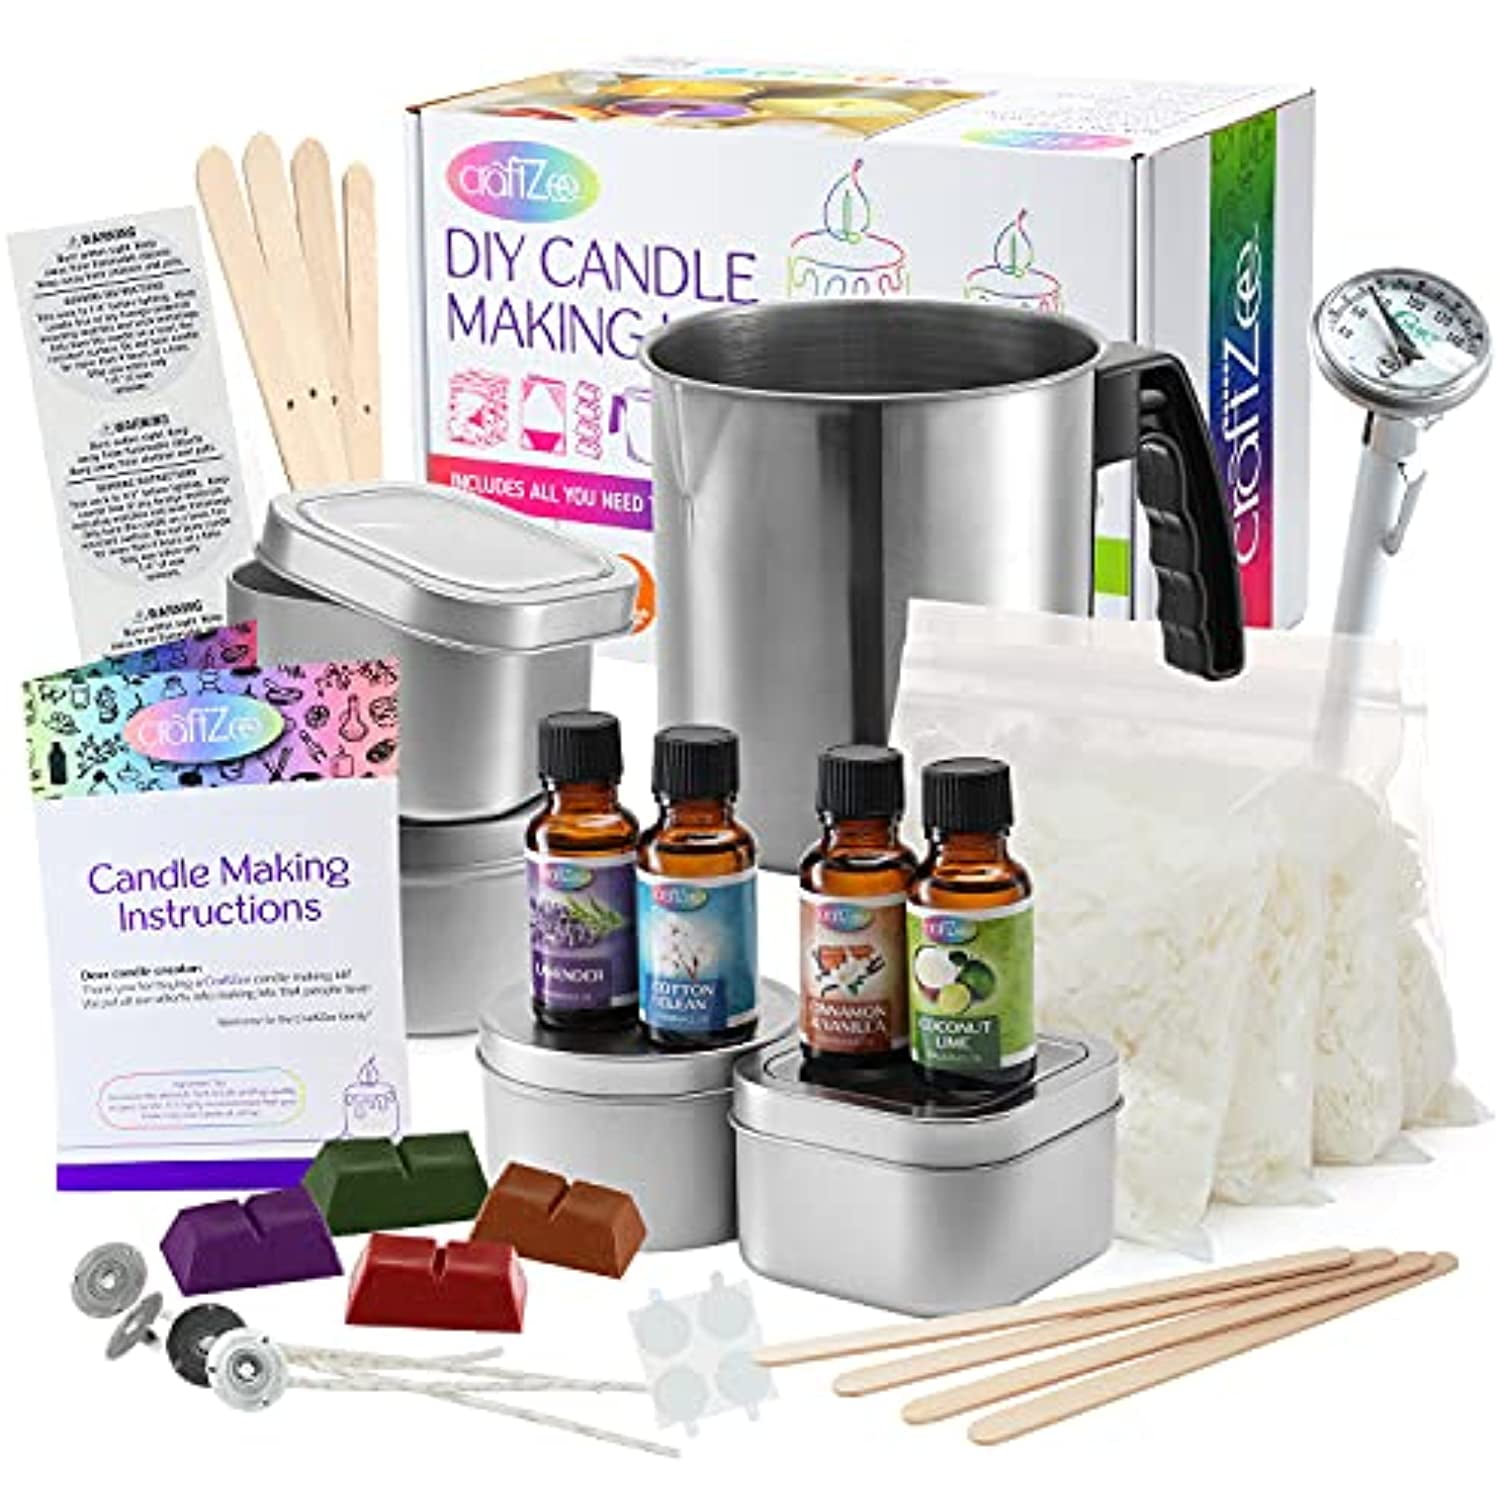 Craftbud Soy Candle Making Kit for Adults, Candle Making Supplies Kit for Adults Kids, 12lb Soy Wax for Candle Making, DIY Candle Makin